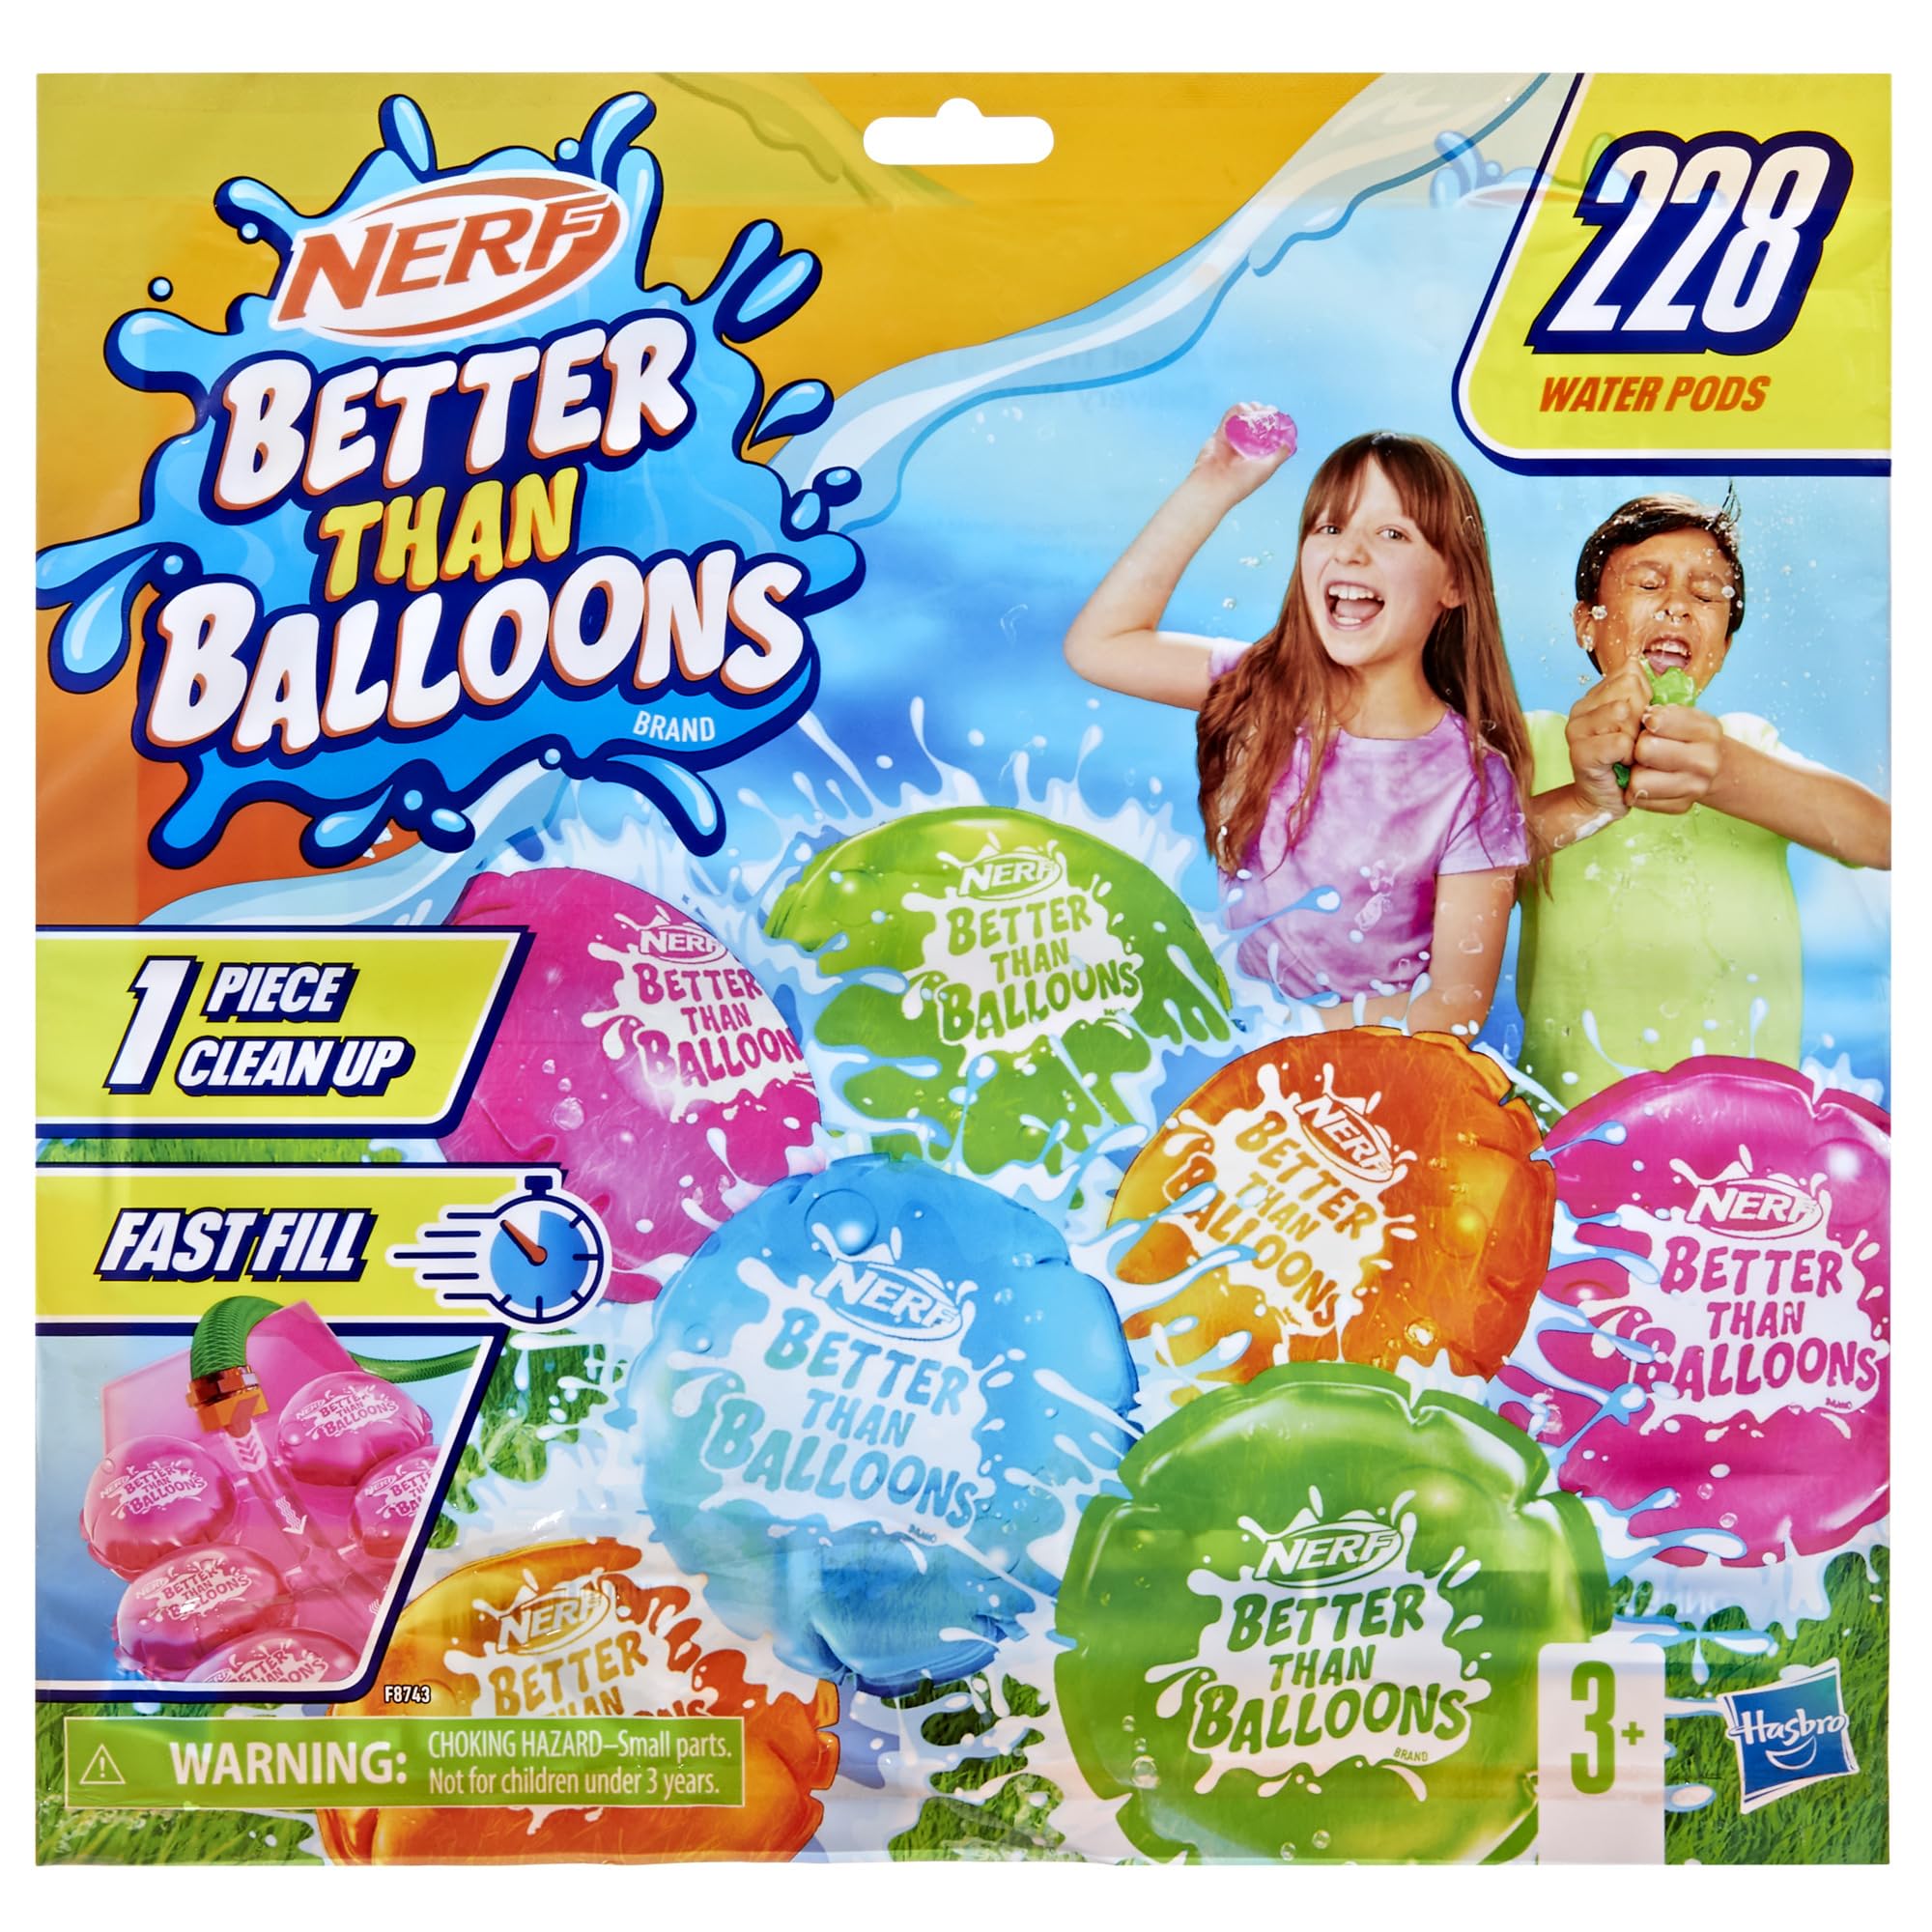 NERF Better Than Balloons Water Toys, 228 Pods, Easy 1 Piece Clean Up, Lots of Ways to Play, Backyard Water Fun, Gifts for Kids, Ages 3+